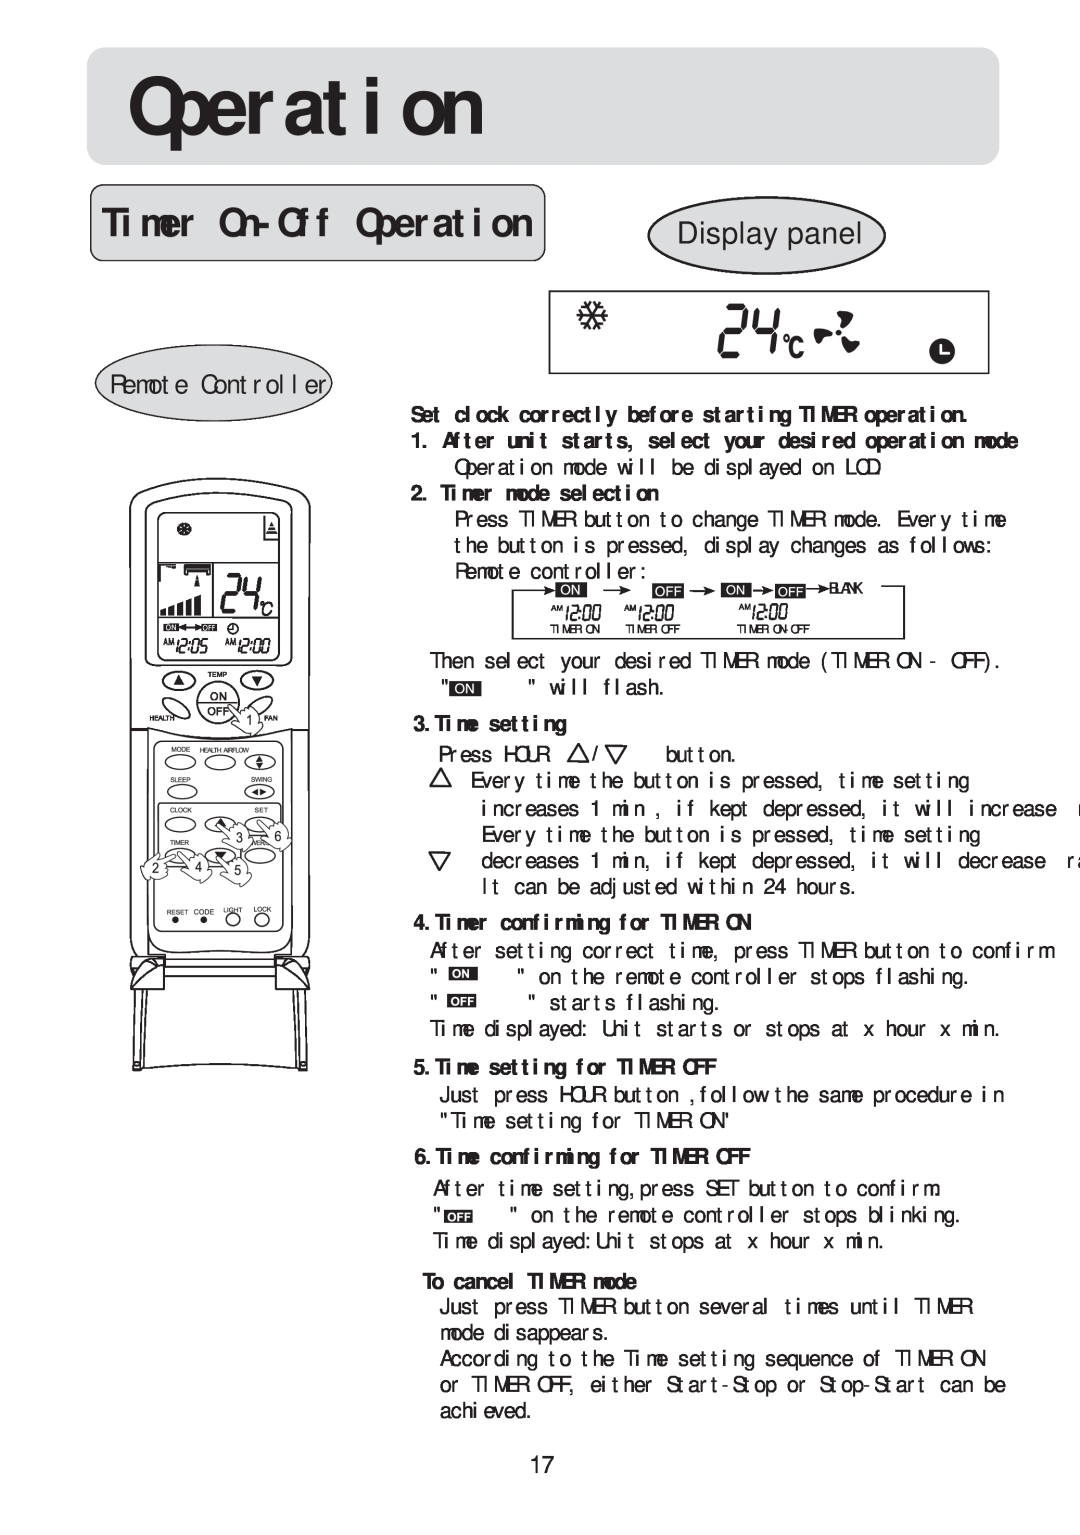 Haier HSU-22RC03/R2(DB) Timer On-OffOperation, Display panel, Timer mode selection, Time setting, To cancel TIMER mode 